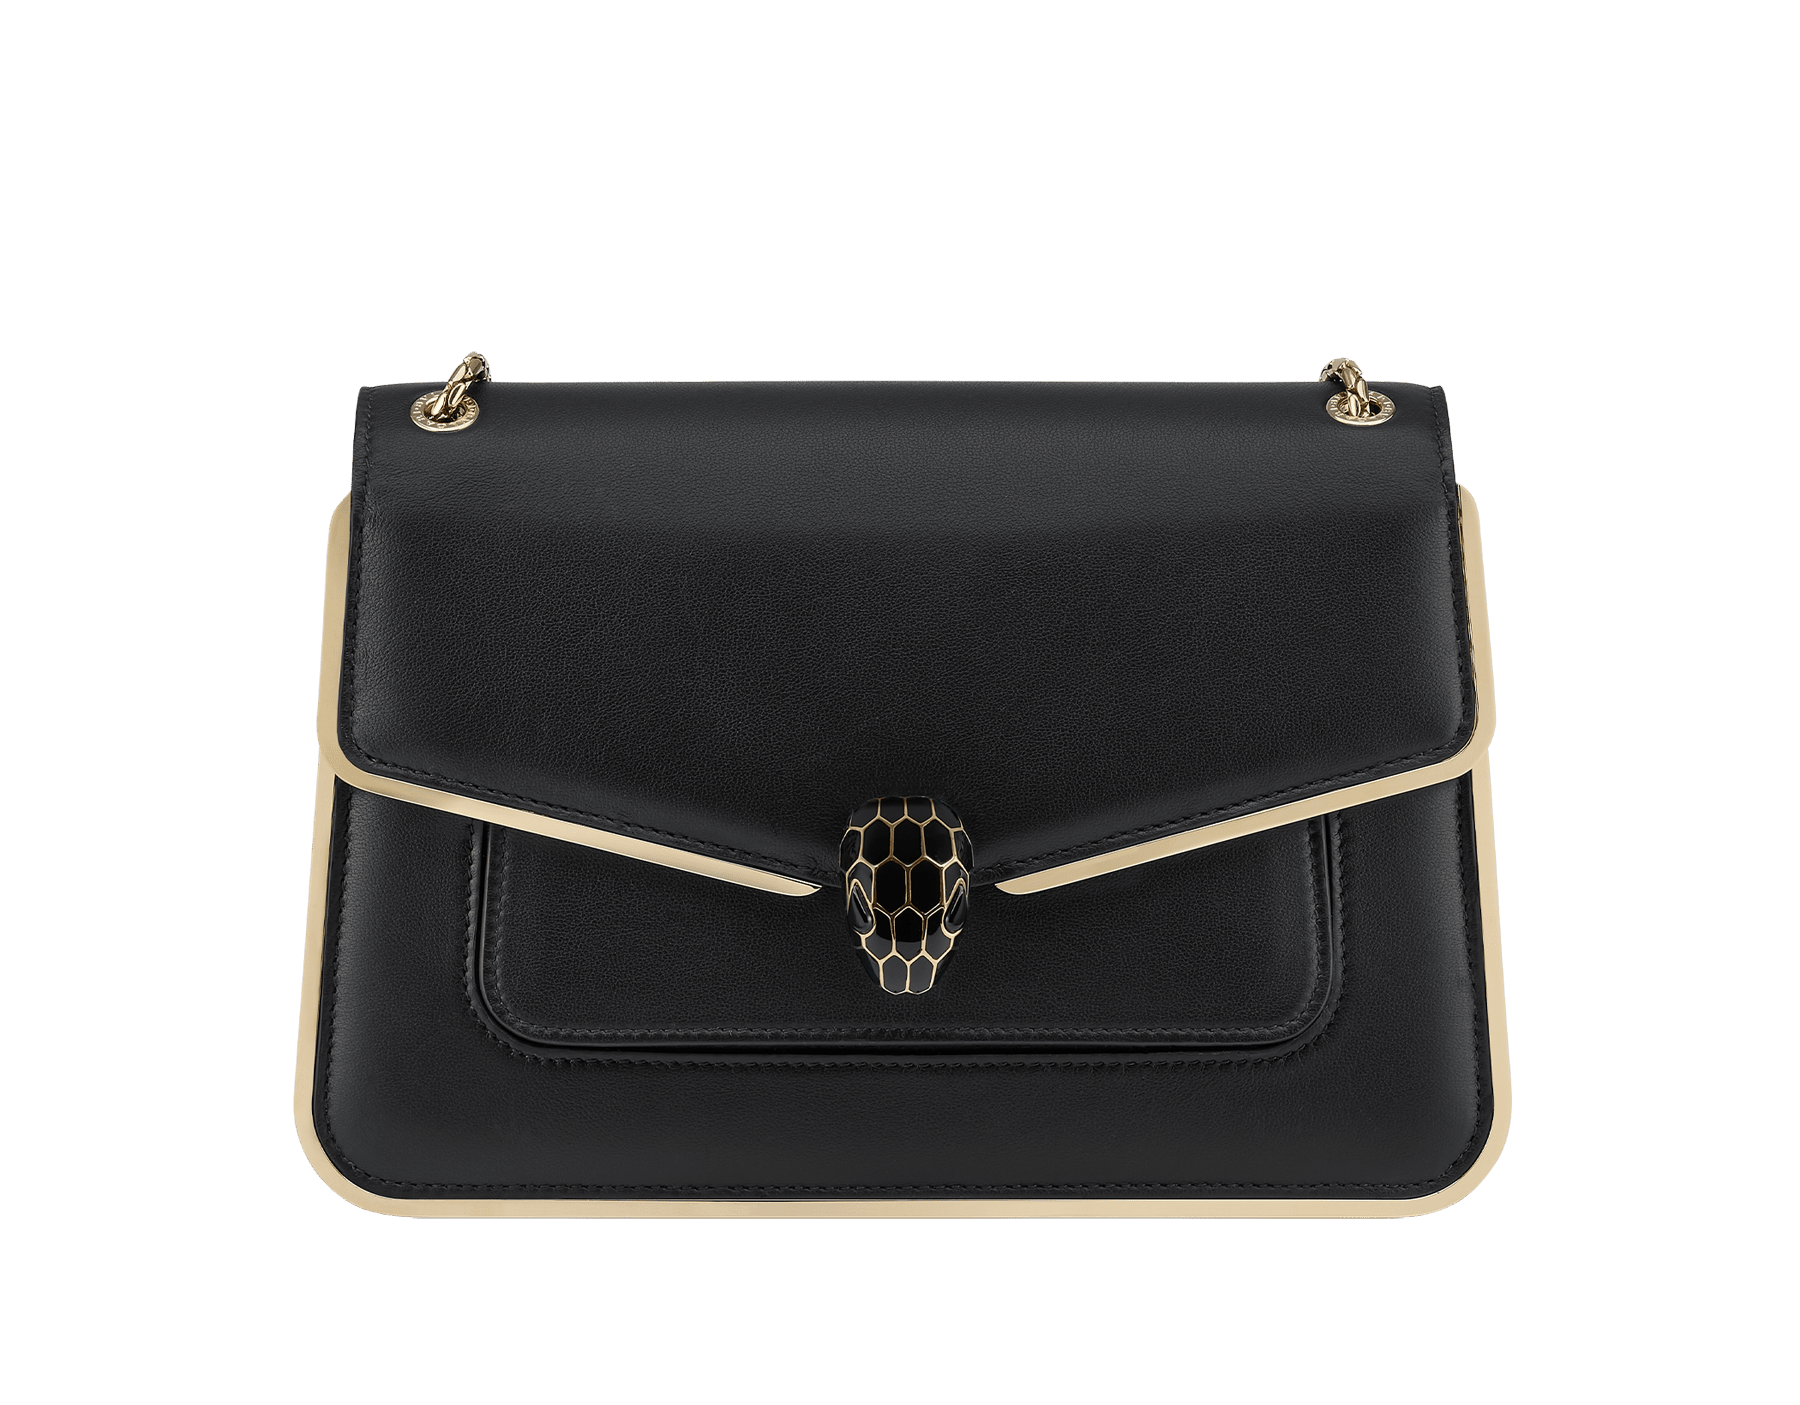 Serpenti Forever medium shoulder bag in black Metropolitan calf leather with light gold-plated brass frames and black nappa leather lining. Captivating snakehead magnetic closure in light gold-plated brass embellished with black enamel scales, and black onyx eyes. 1077-MF image 1